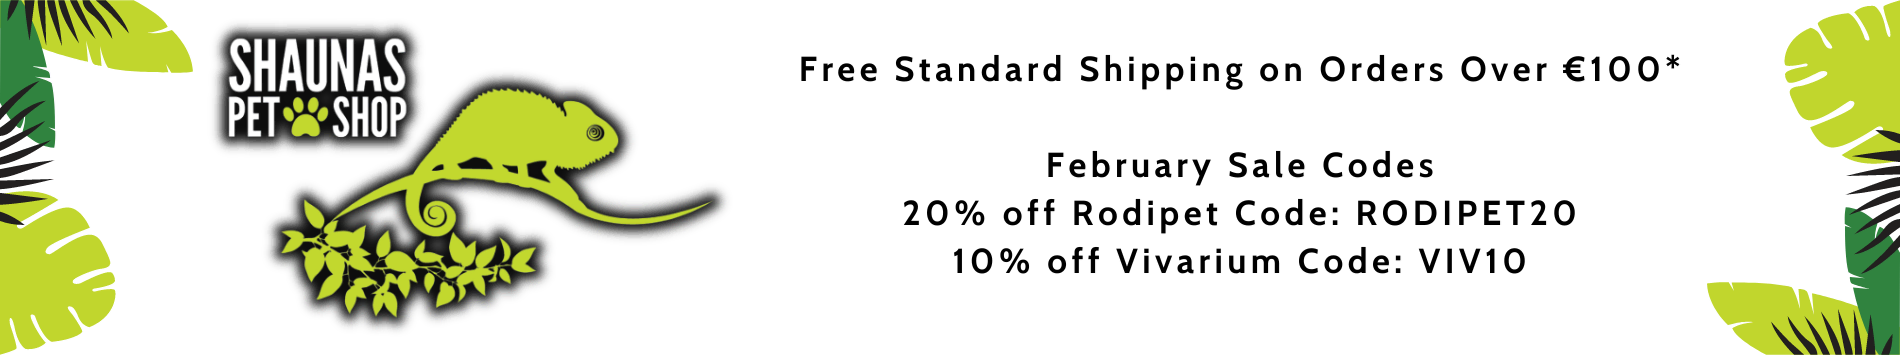 Free standard shipping on orders over €100. February Sale Codes: 20% off Rodipet Code: RODIPET20. 10% off Vivariums Code: VIV10